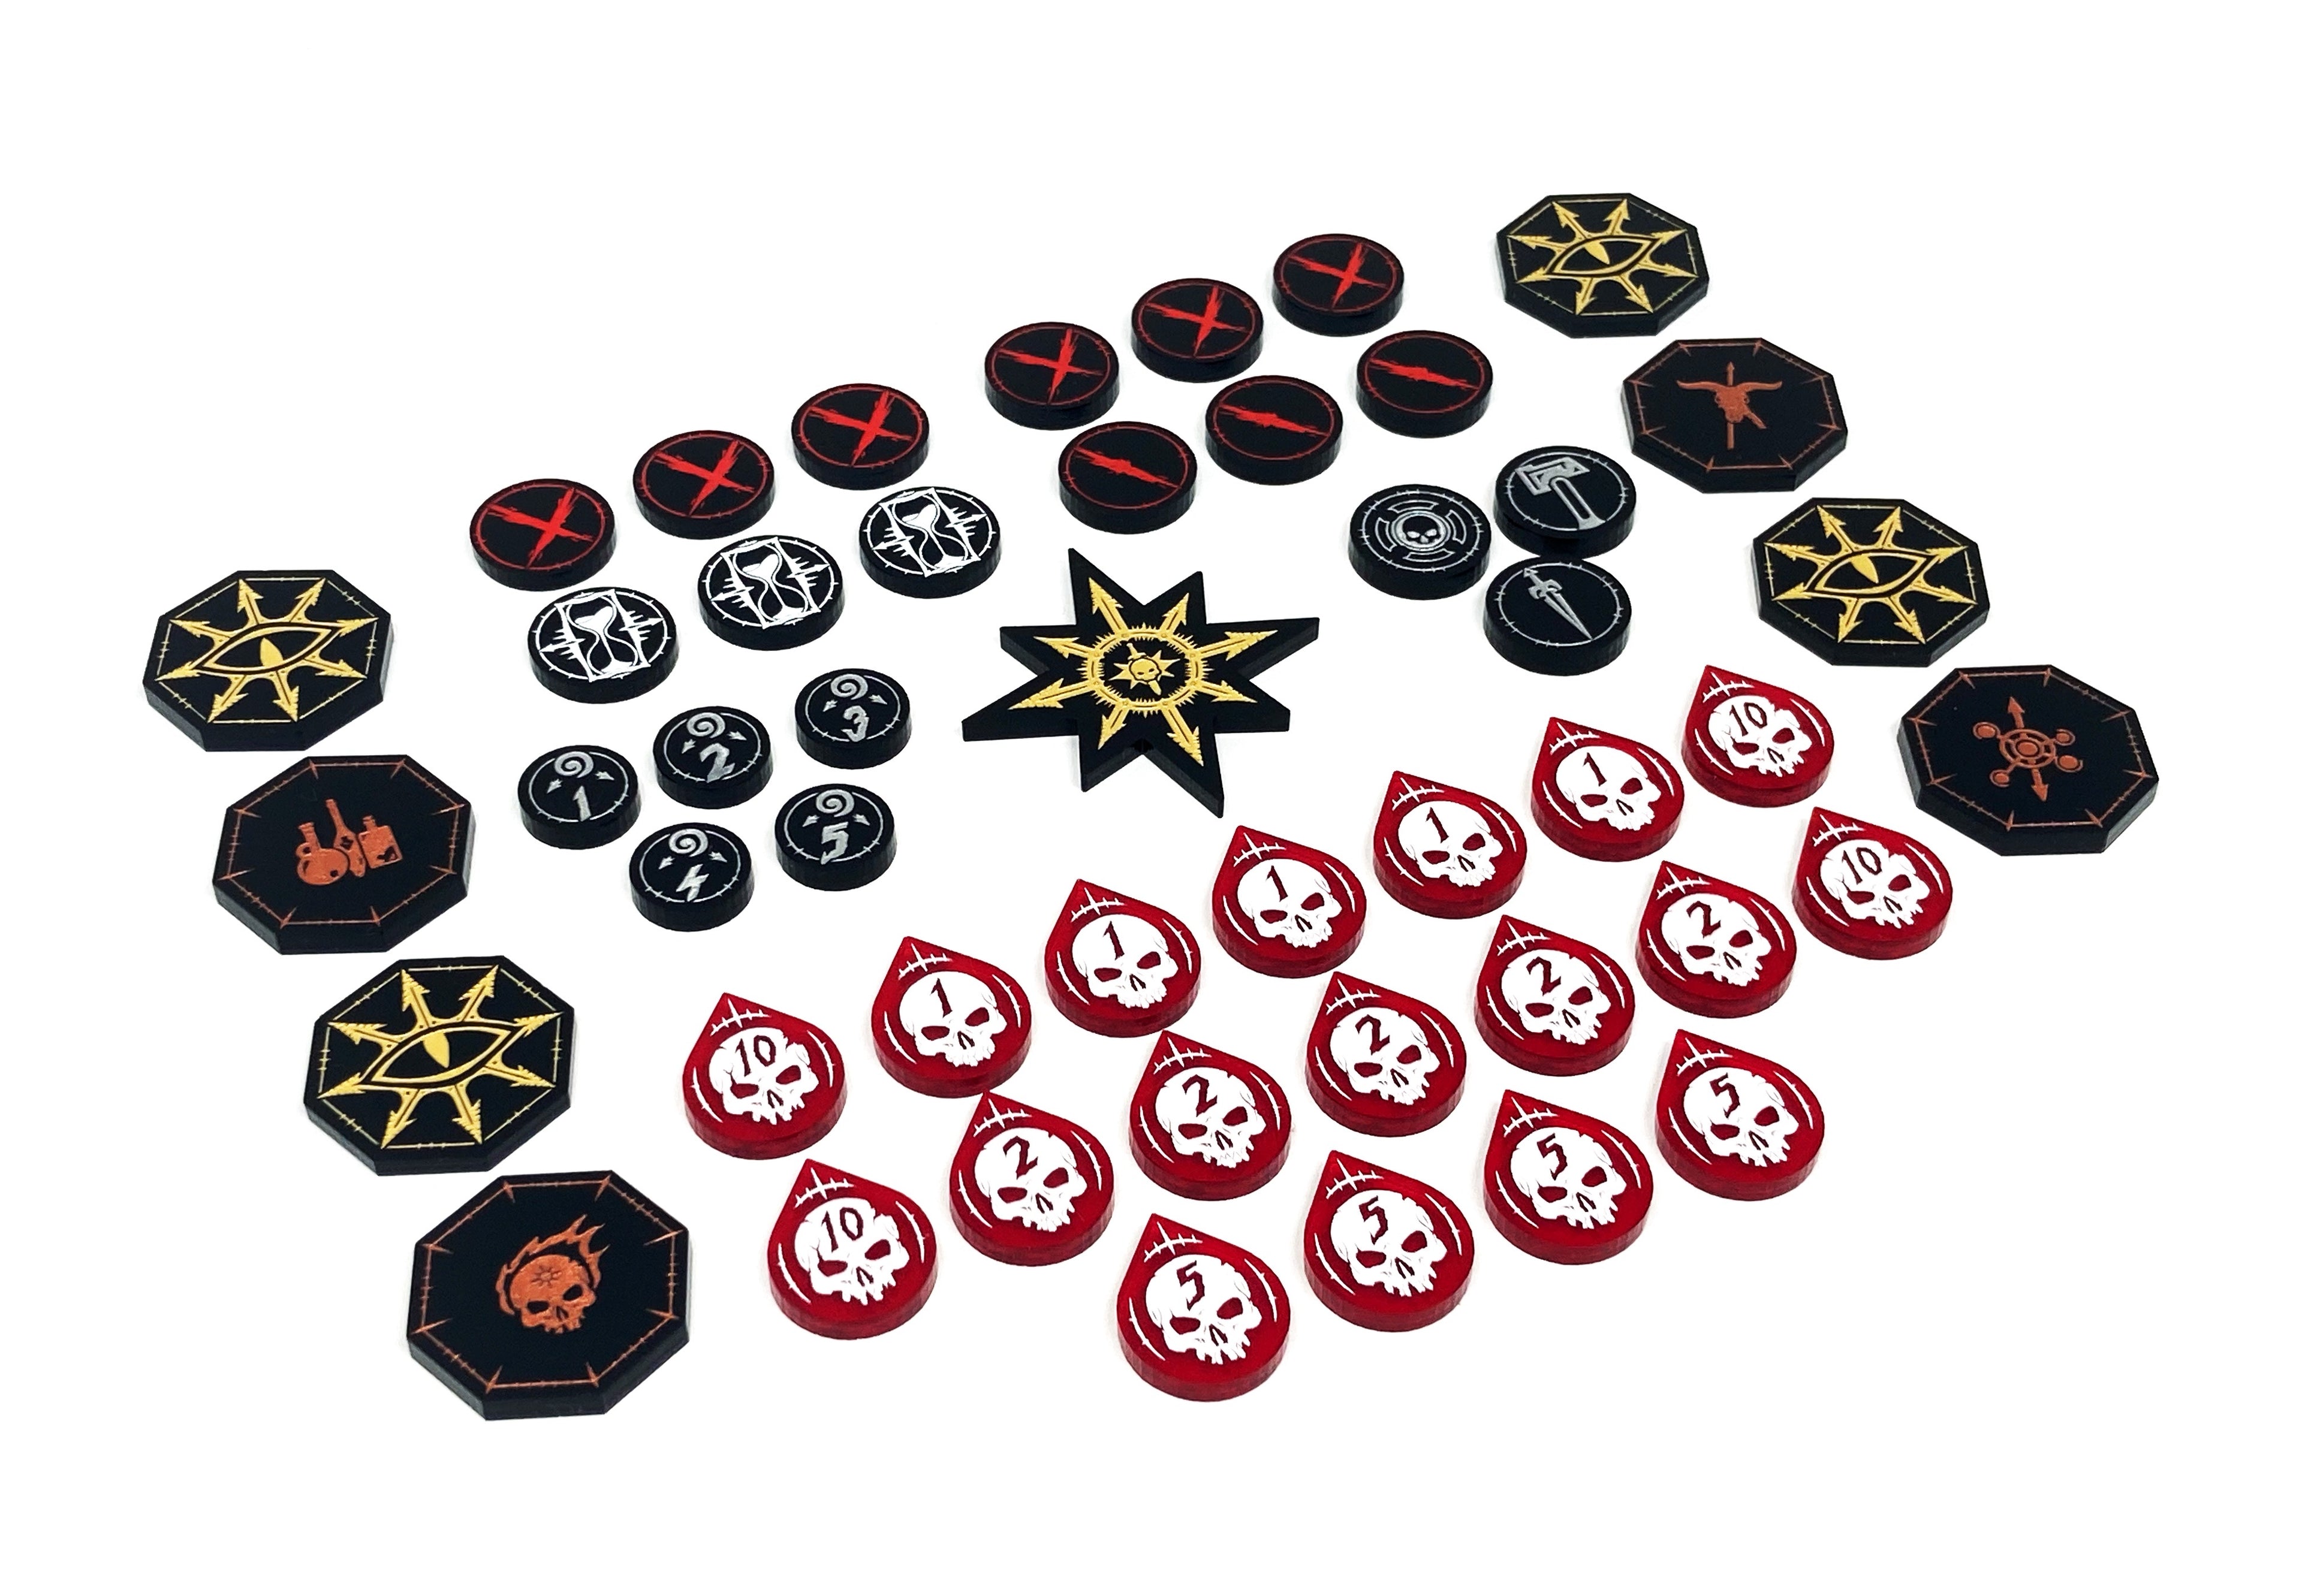 Single player Token set for Warcry